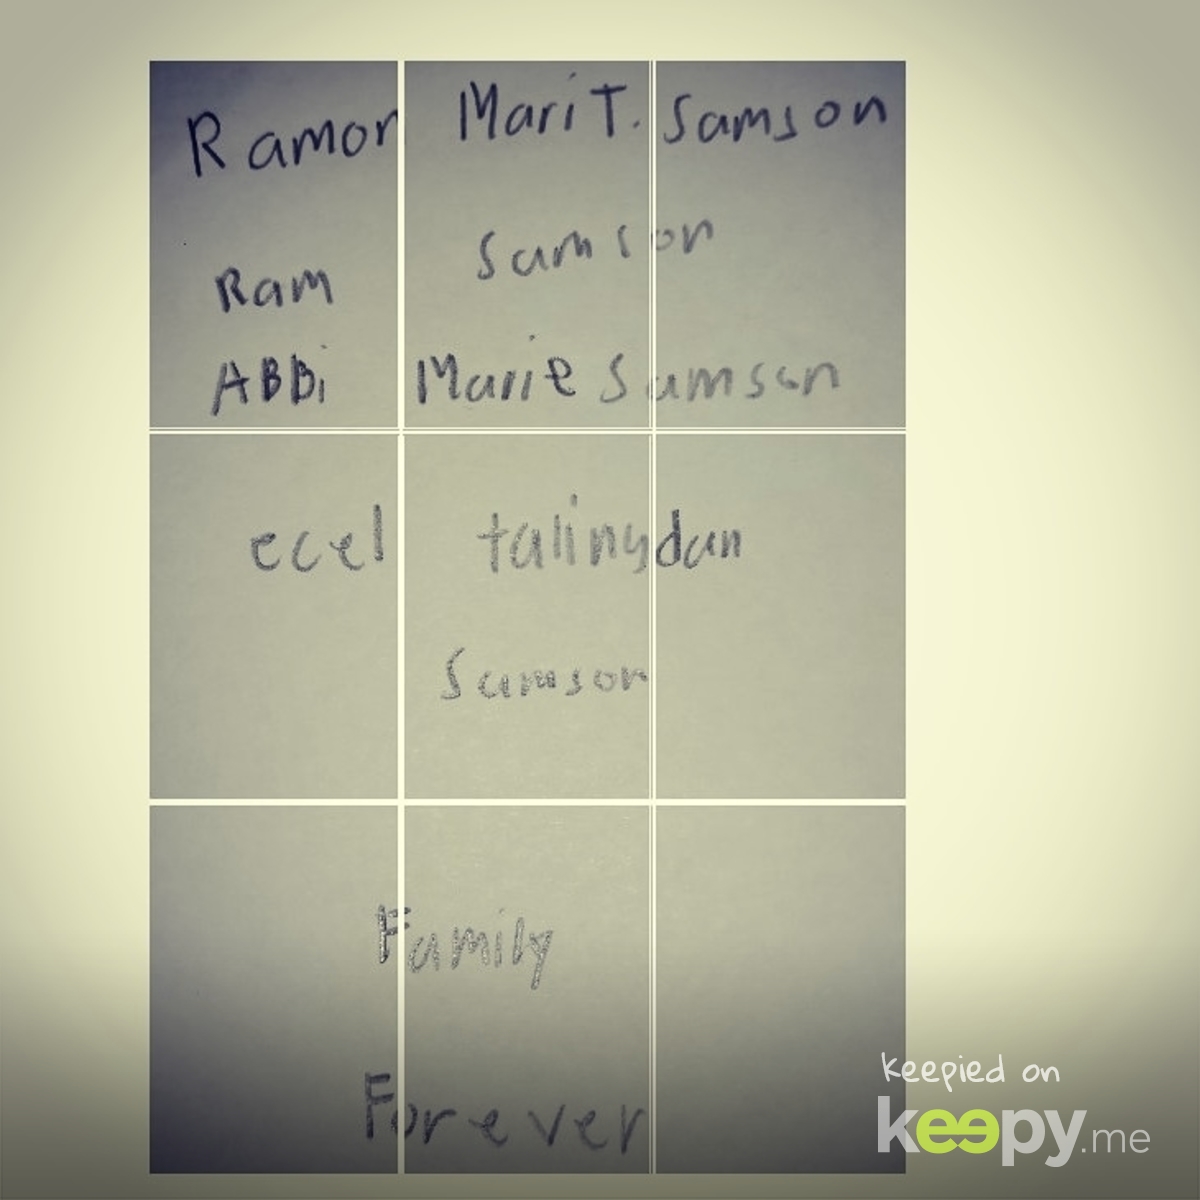 Indeed! We are blessed and favored for a family like ours!  We are forever! 
Handwritten by Mari Feb42020 » Keepy.me